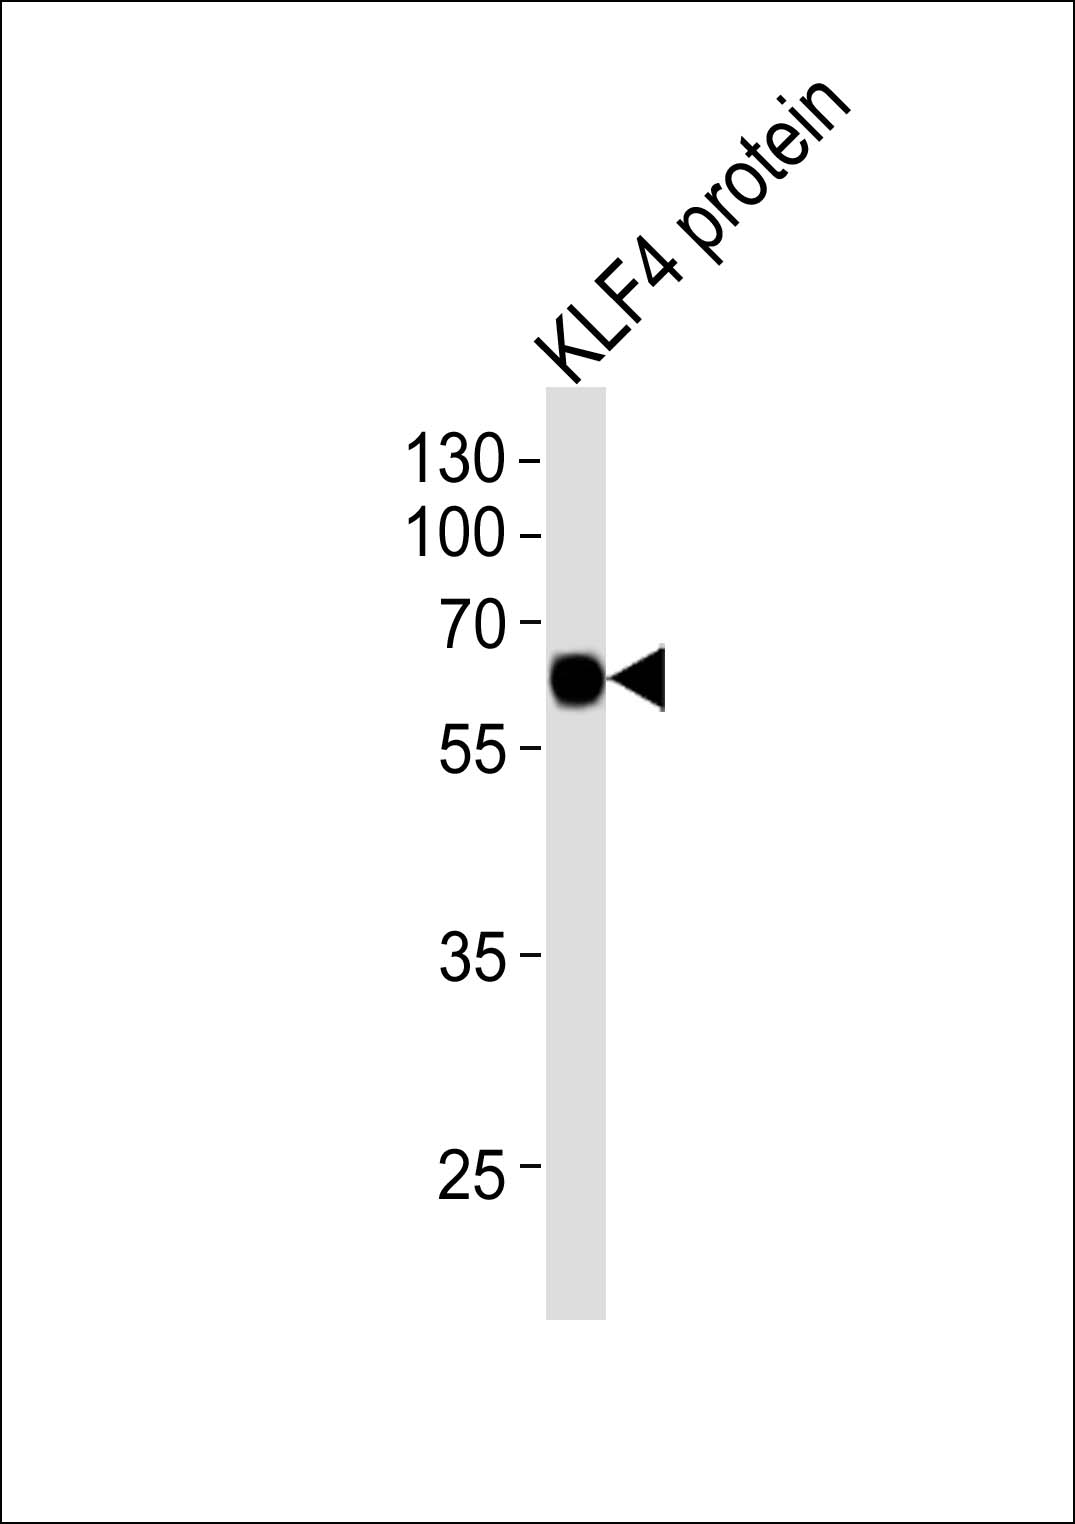 Lane 1: KLF4 protein; probed with KLF4 (5A1)  Monoclonal Antibody, unconjugated (bsm-51264M) at 1:2000 overnight at 4\u00b0C followed by a conjugated secondary antibody for 60 minutes at 37\u00b0C.